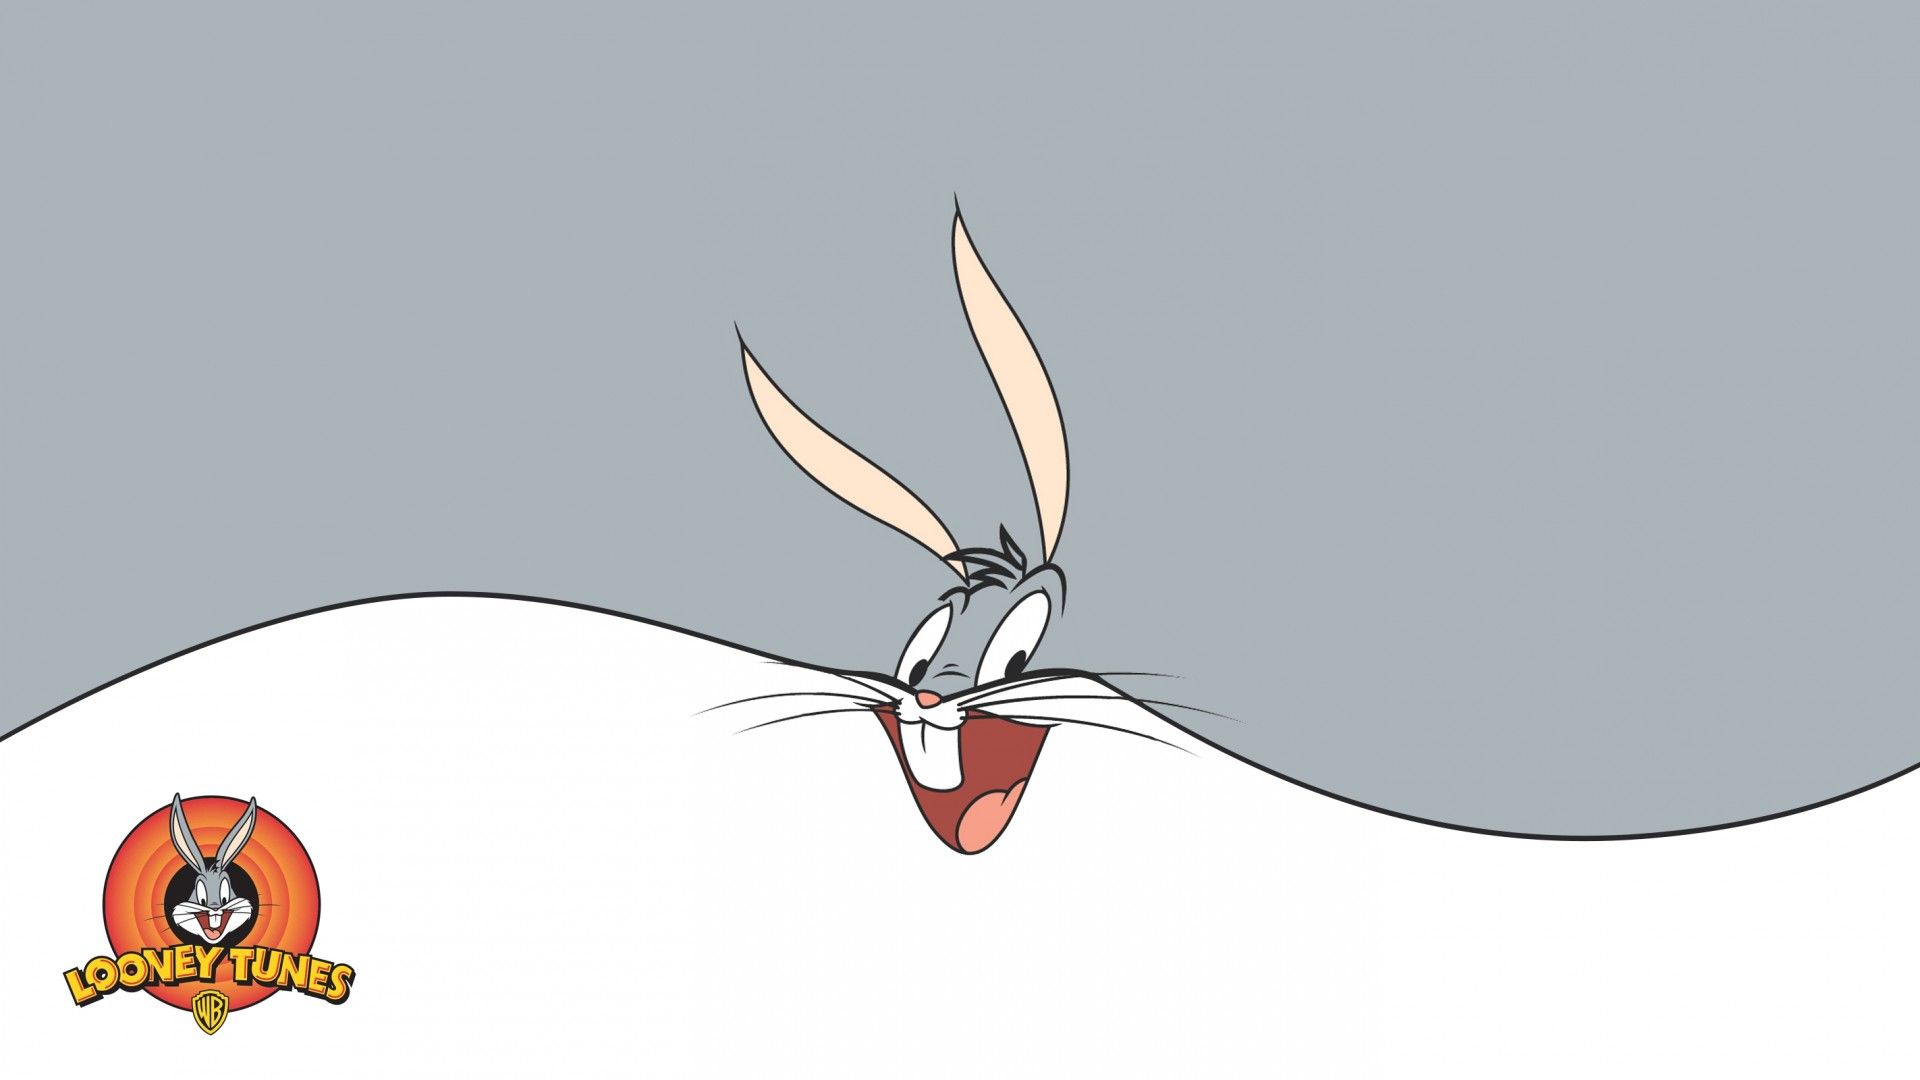 Free download Bugs Bunny Wallpaper High Definition High Quality [1920x1080] for your Desktop, Mobile & Tablet. Explore Bugs Bunny Wallpaper. Baby Bunny Wallpaper, Bunny Wallpaper, Bugs Bunny Wallpaper